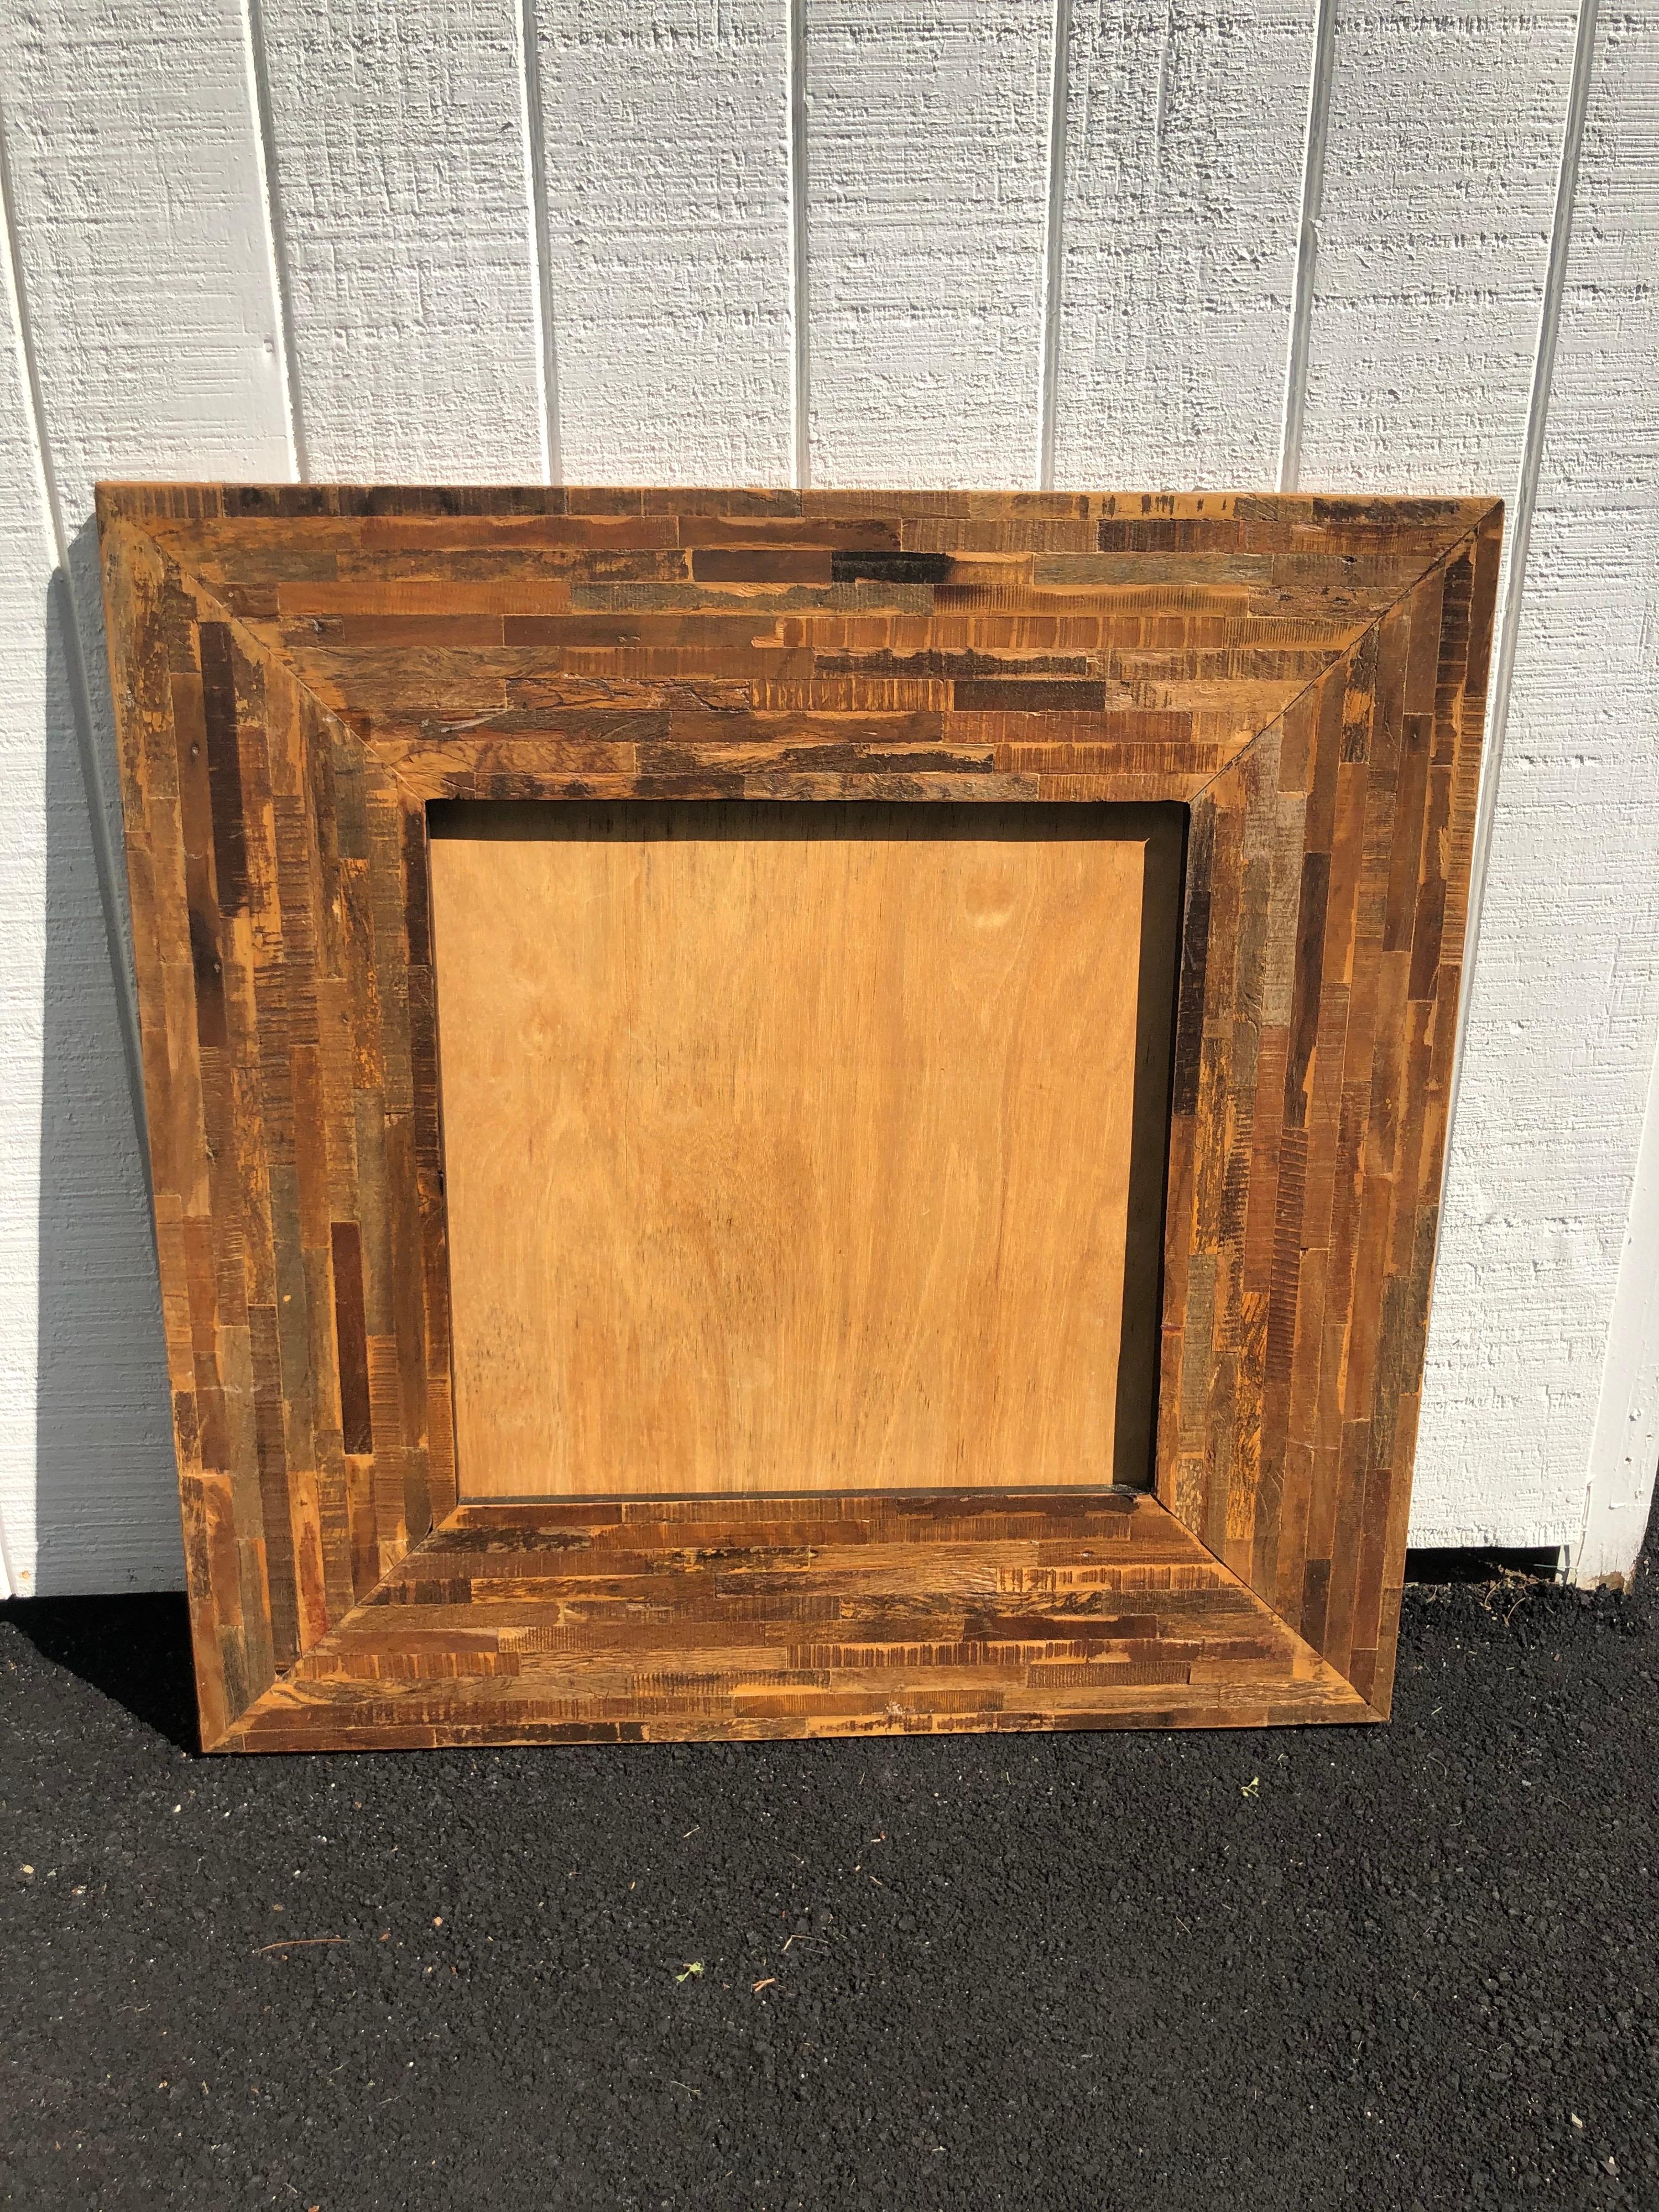 Huge square wooden frame for a large mirror or artwork. Solid atchwork iece. Heavy and solid. Use to give some texture to a room. Perfect for a lodge bulletin board or rustic restaurant. Add corkboard or a mirror. Or a iece of art.